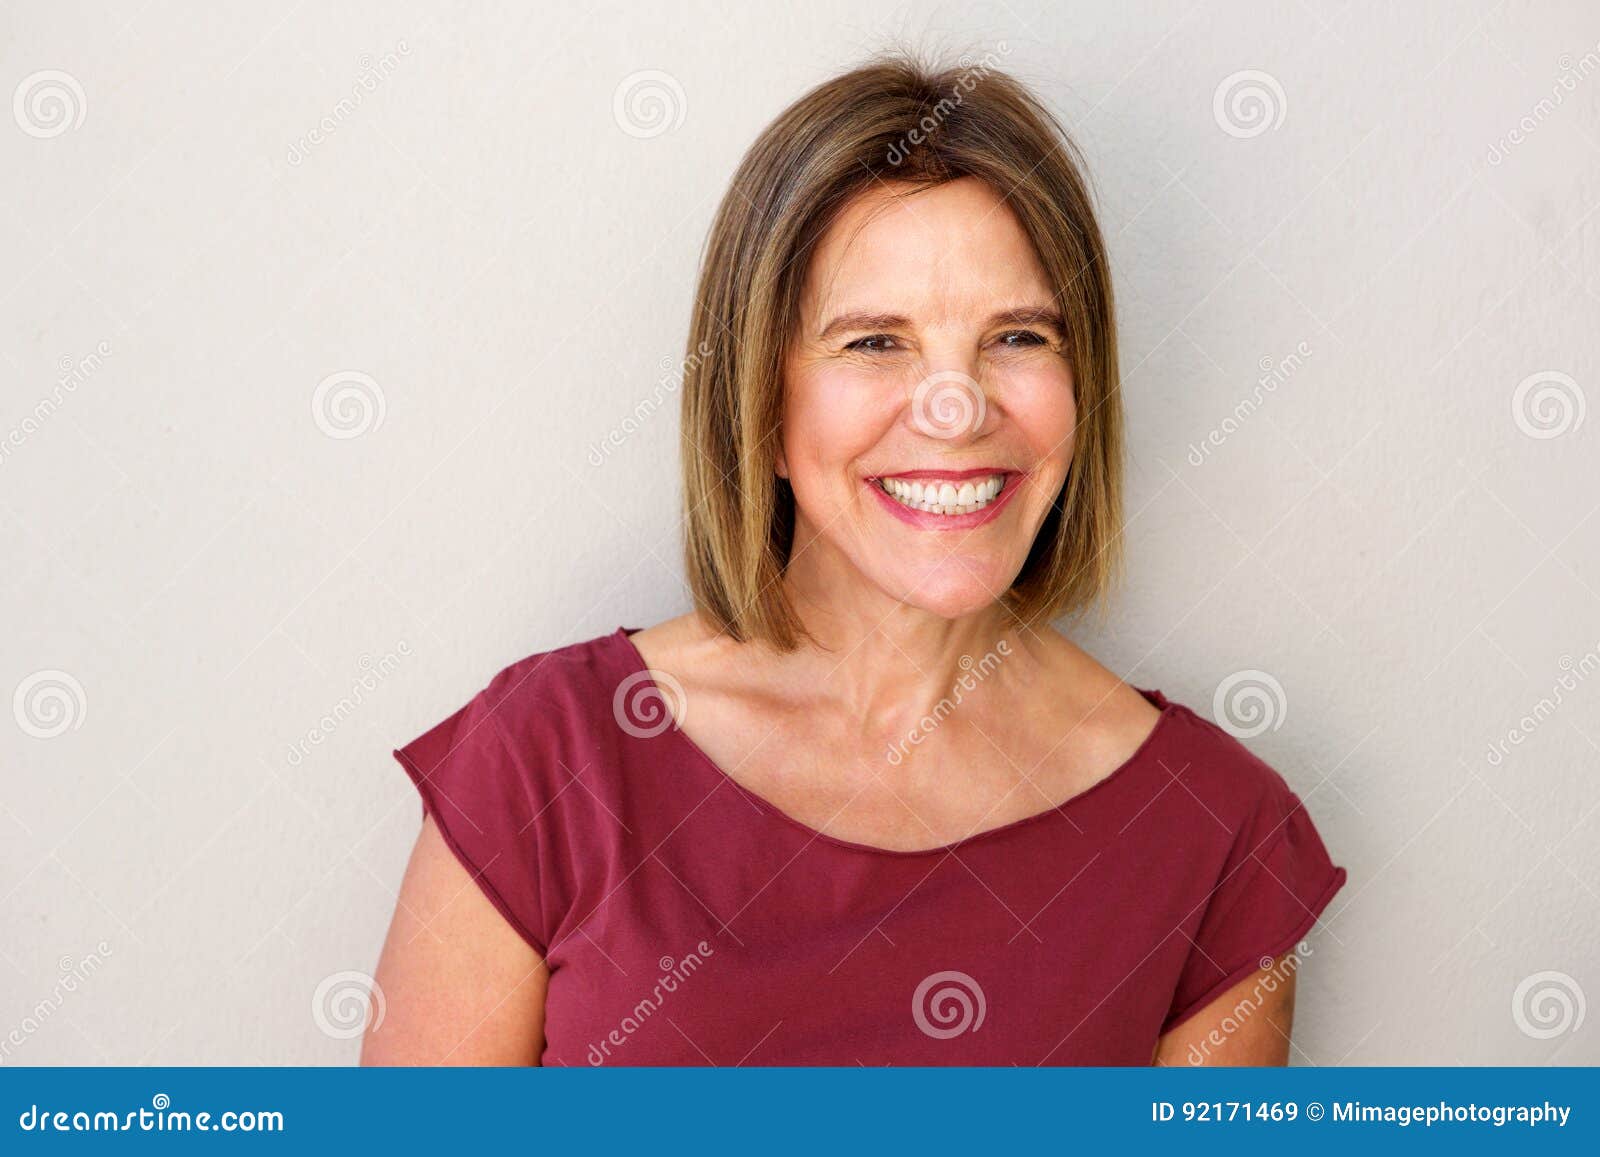 close up beautiful middle age woman smiling against white wall